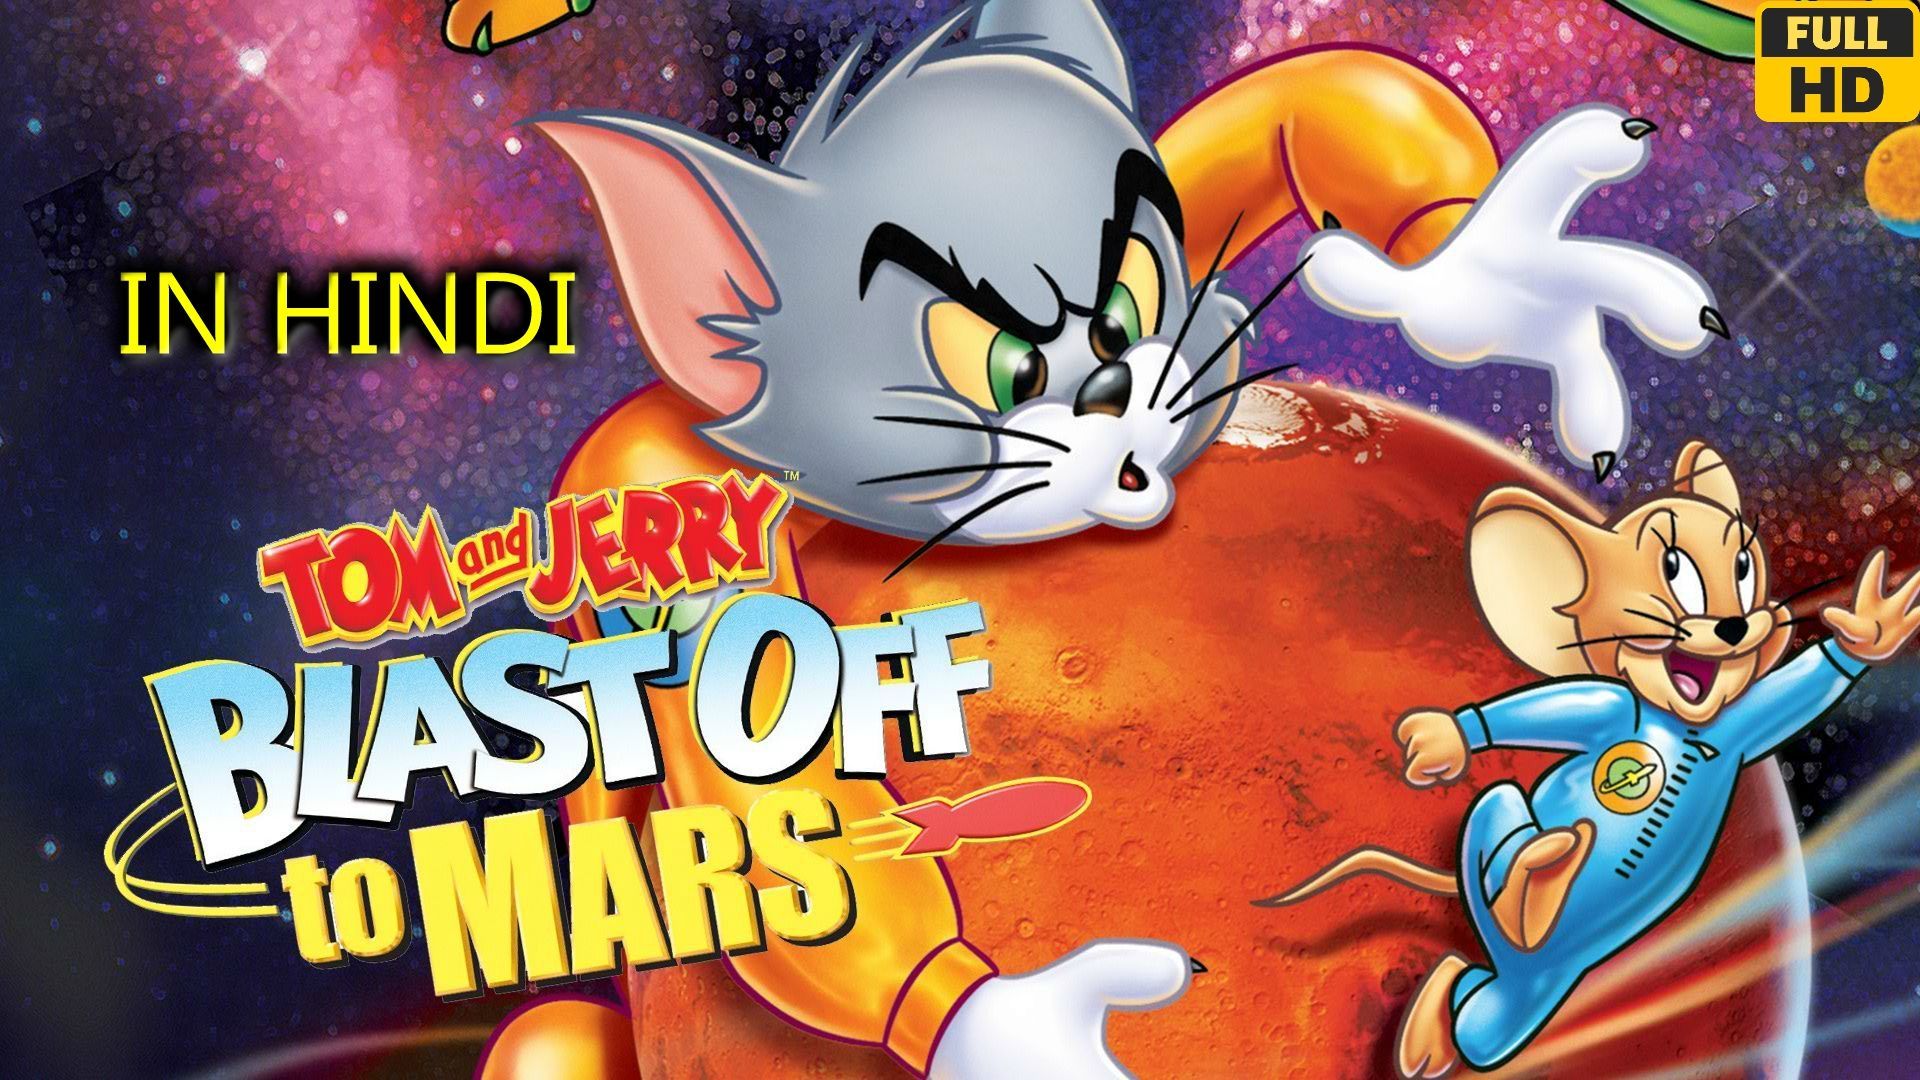 Tom and Jerry Blast Off to Mars 2005 in Hindi - Bilibili